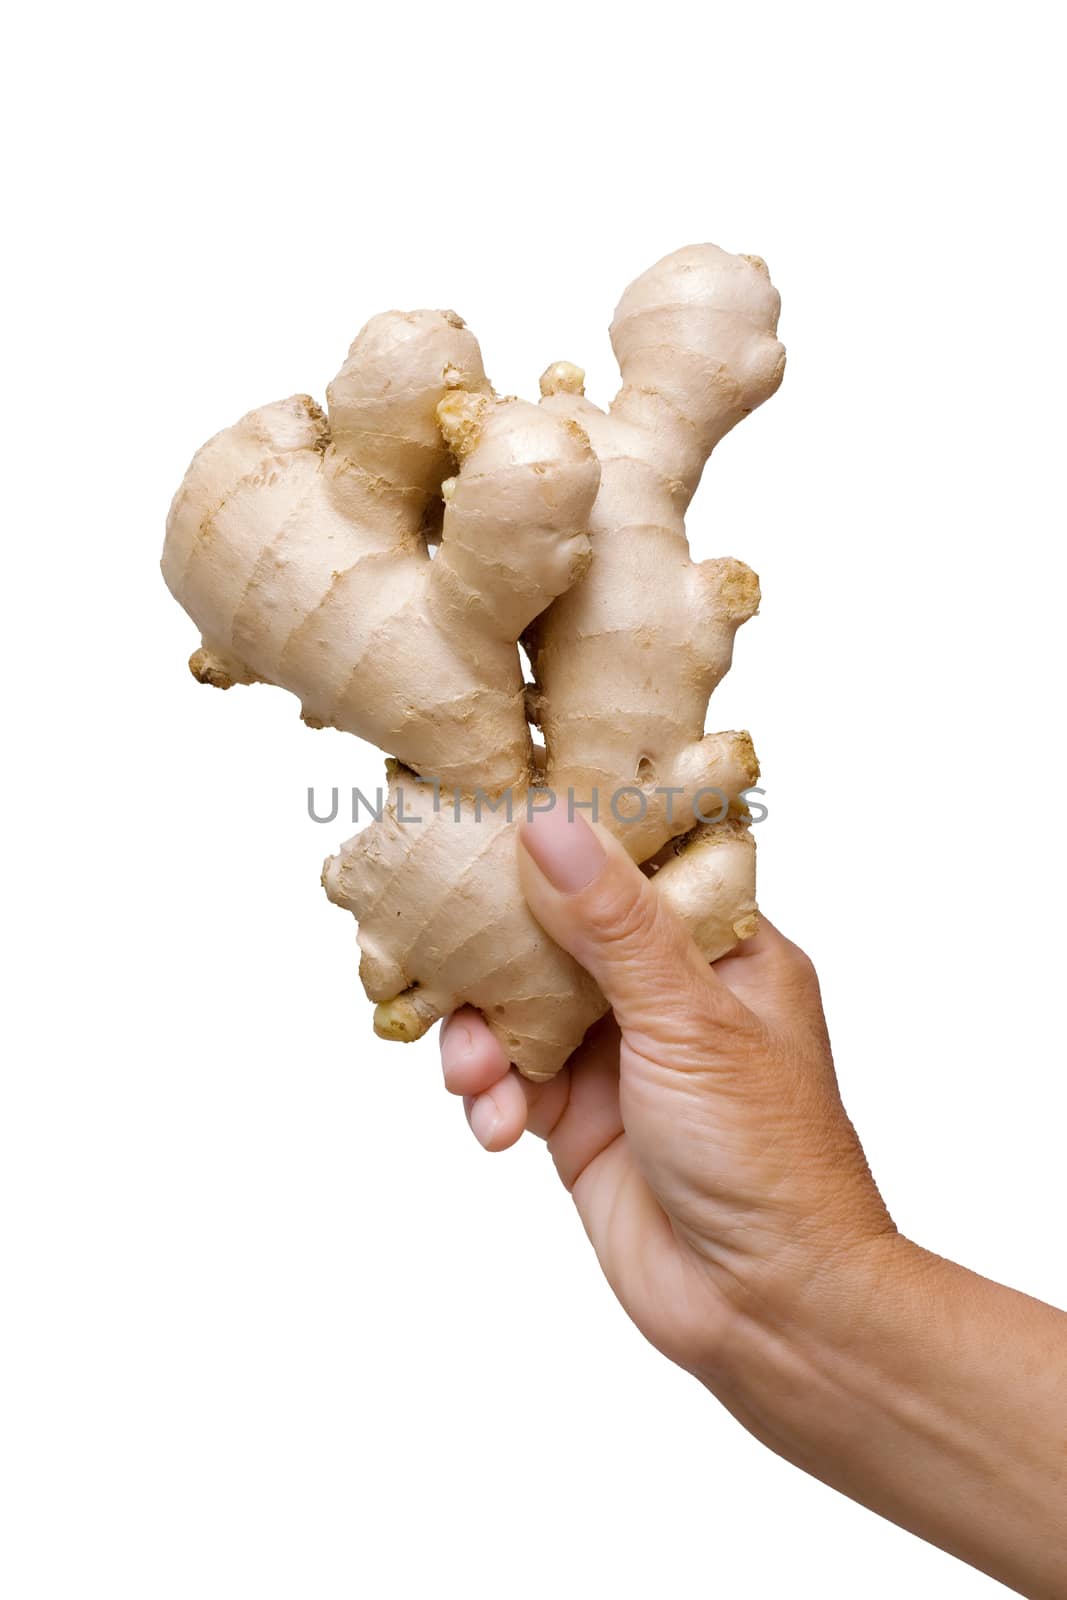 Holding ginger root on white background by myyaym